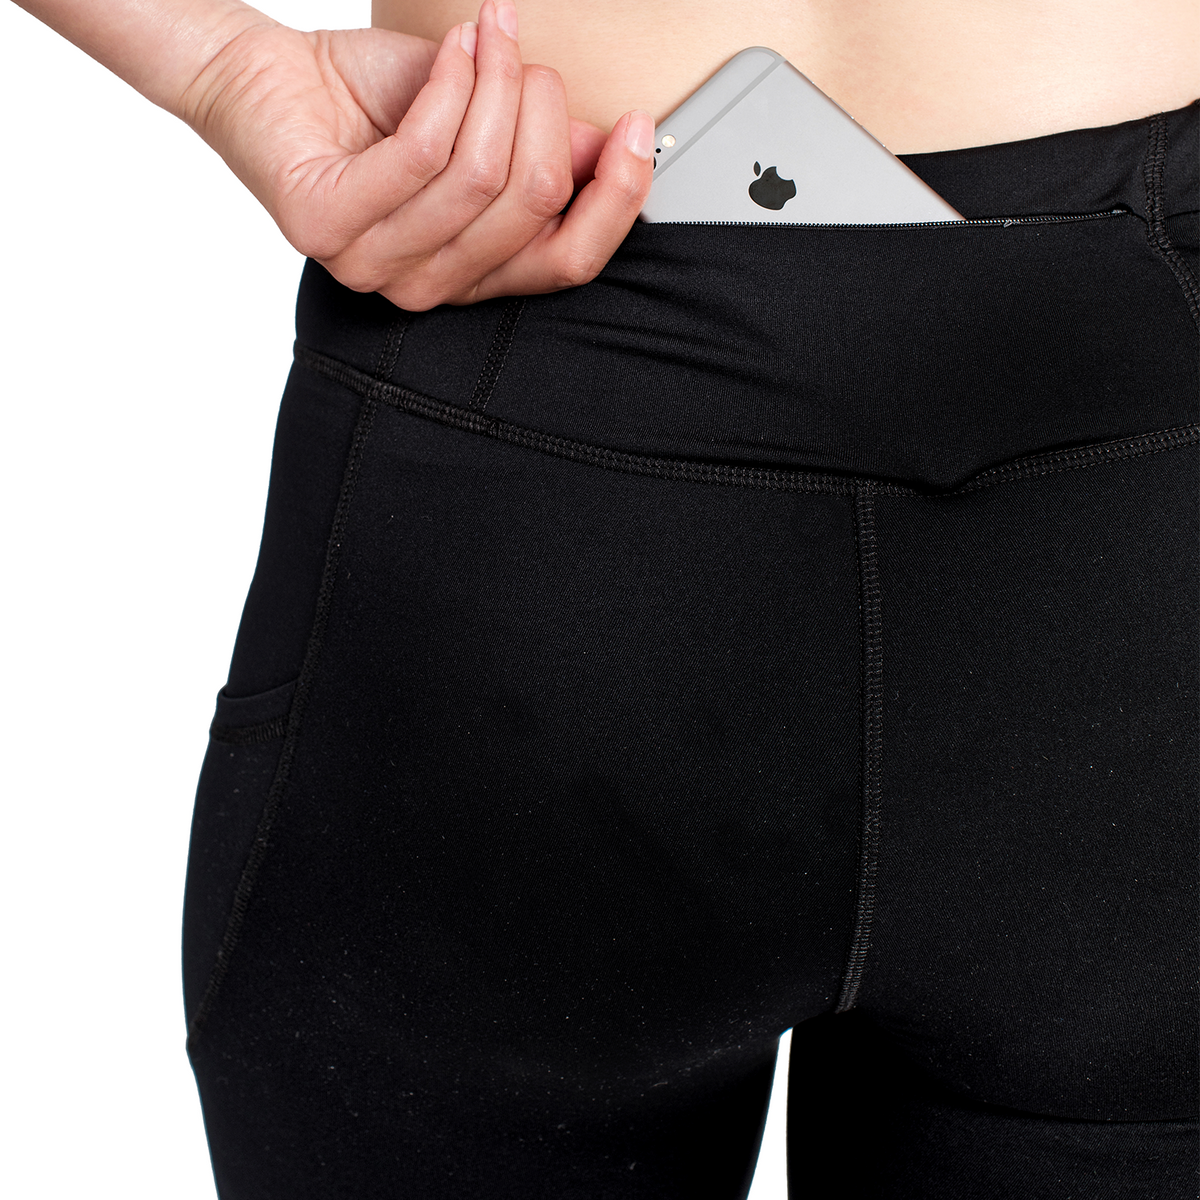 High Waisted Pocket Leggings, Made in Canada